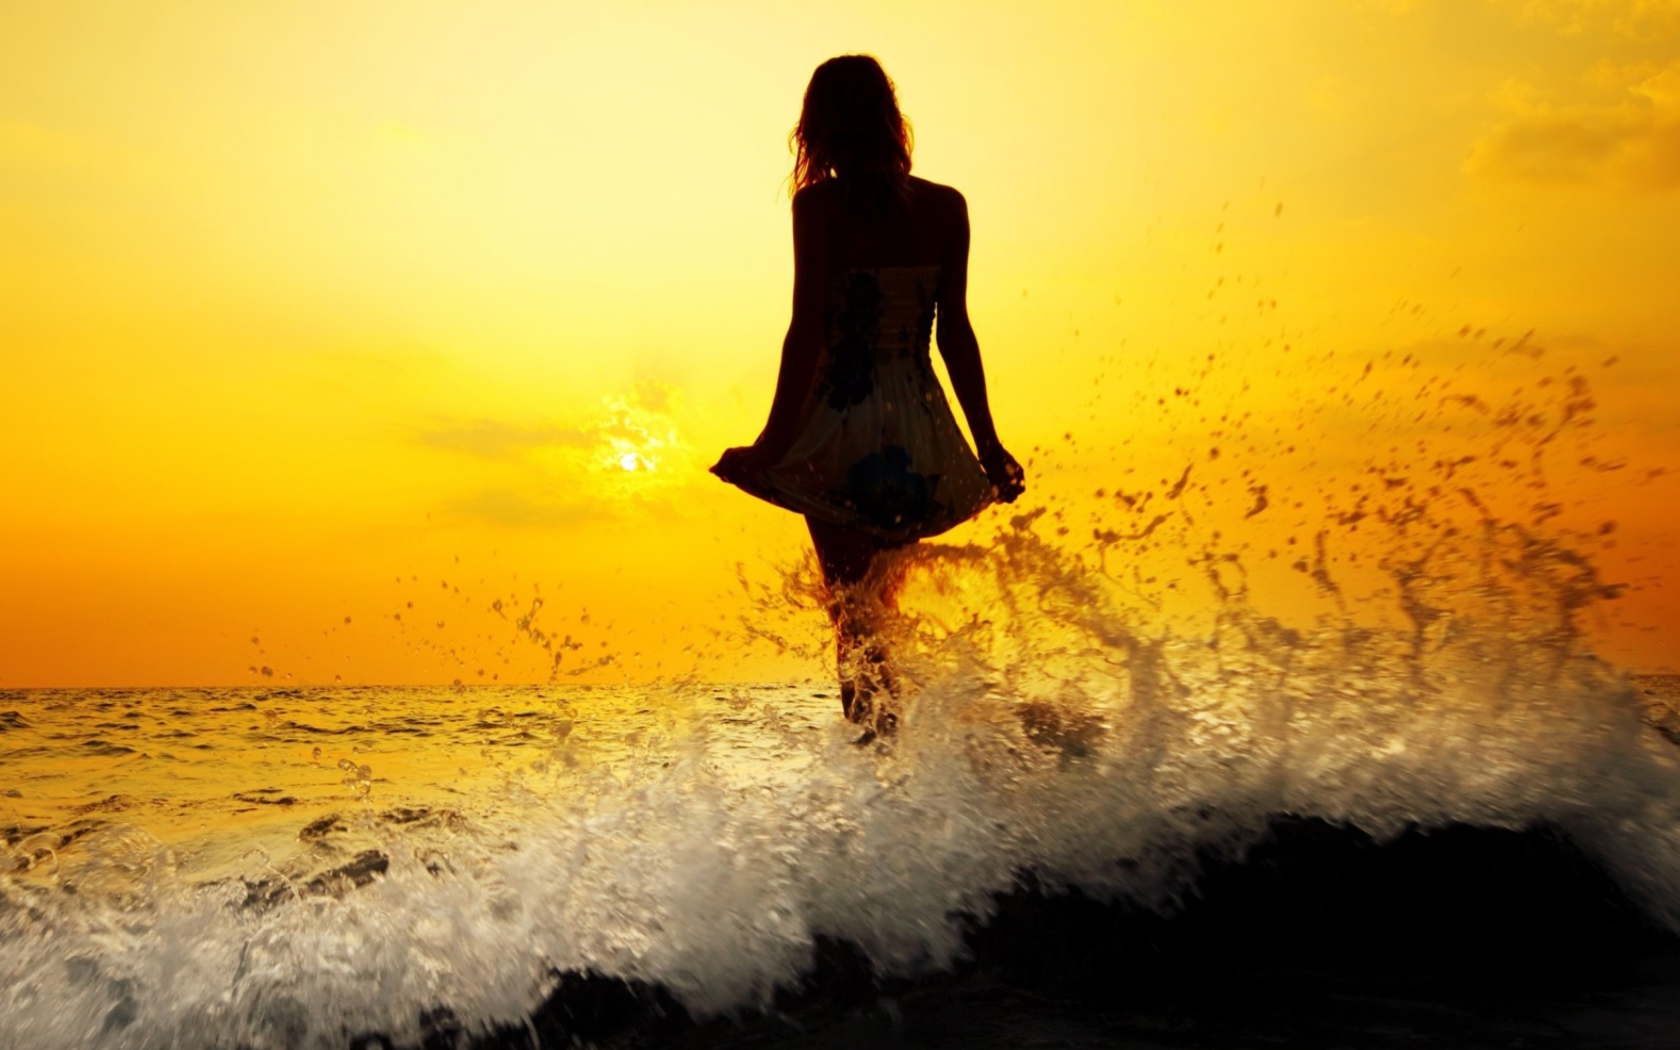 Girl Silhouette In Sea Waves At Sunset screenshot #1 1680x1050